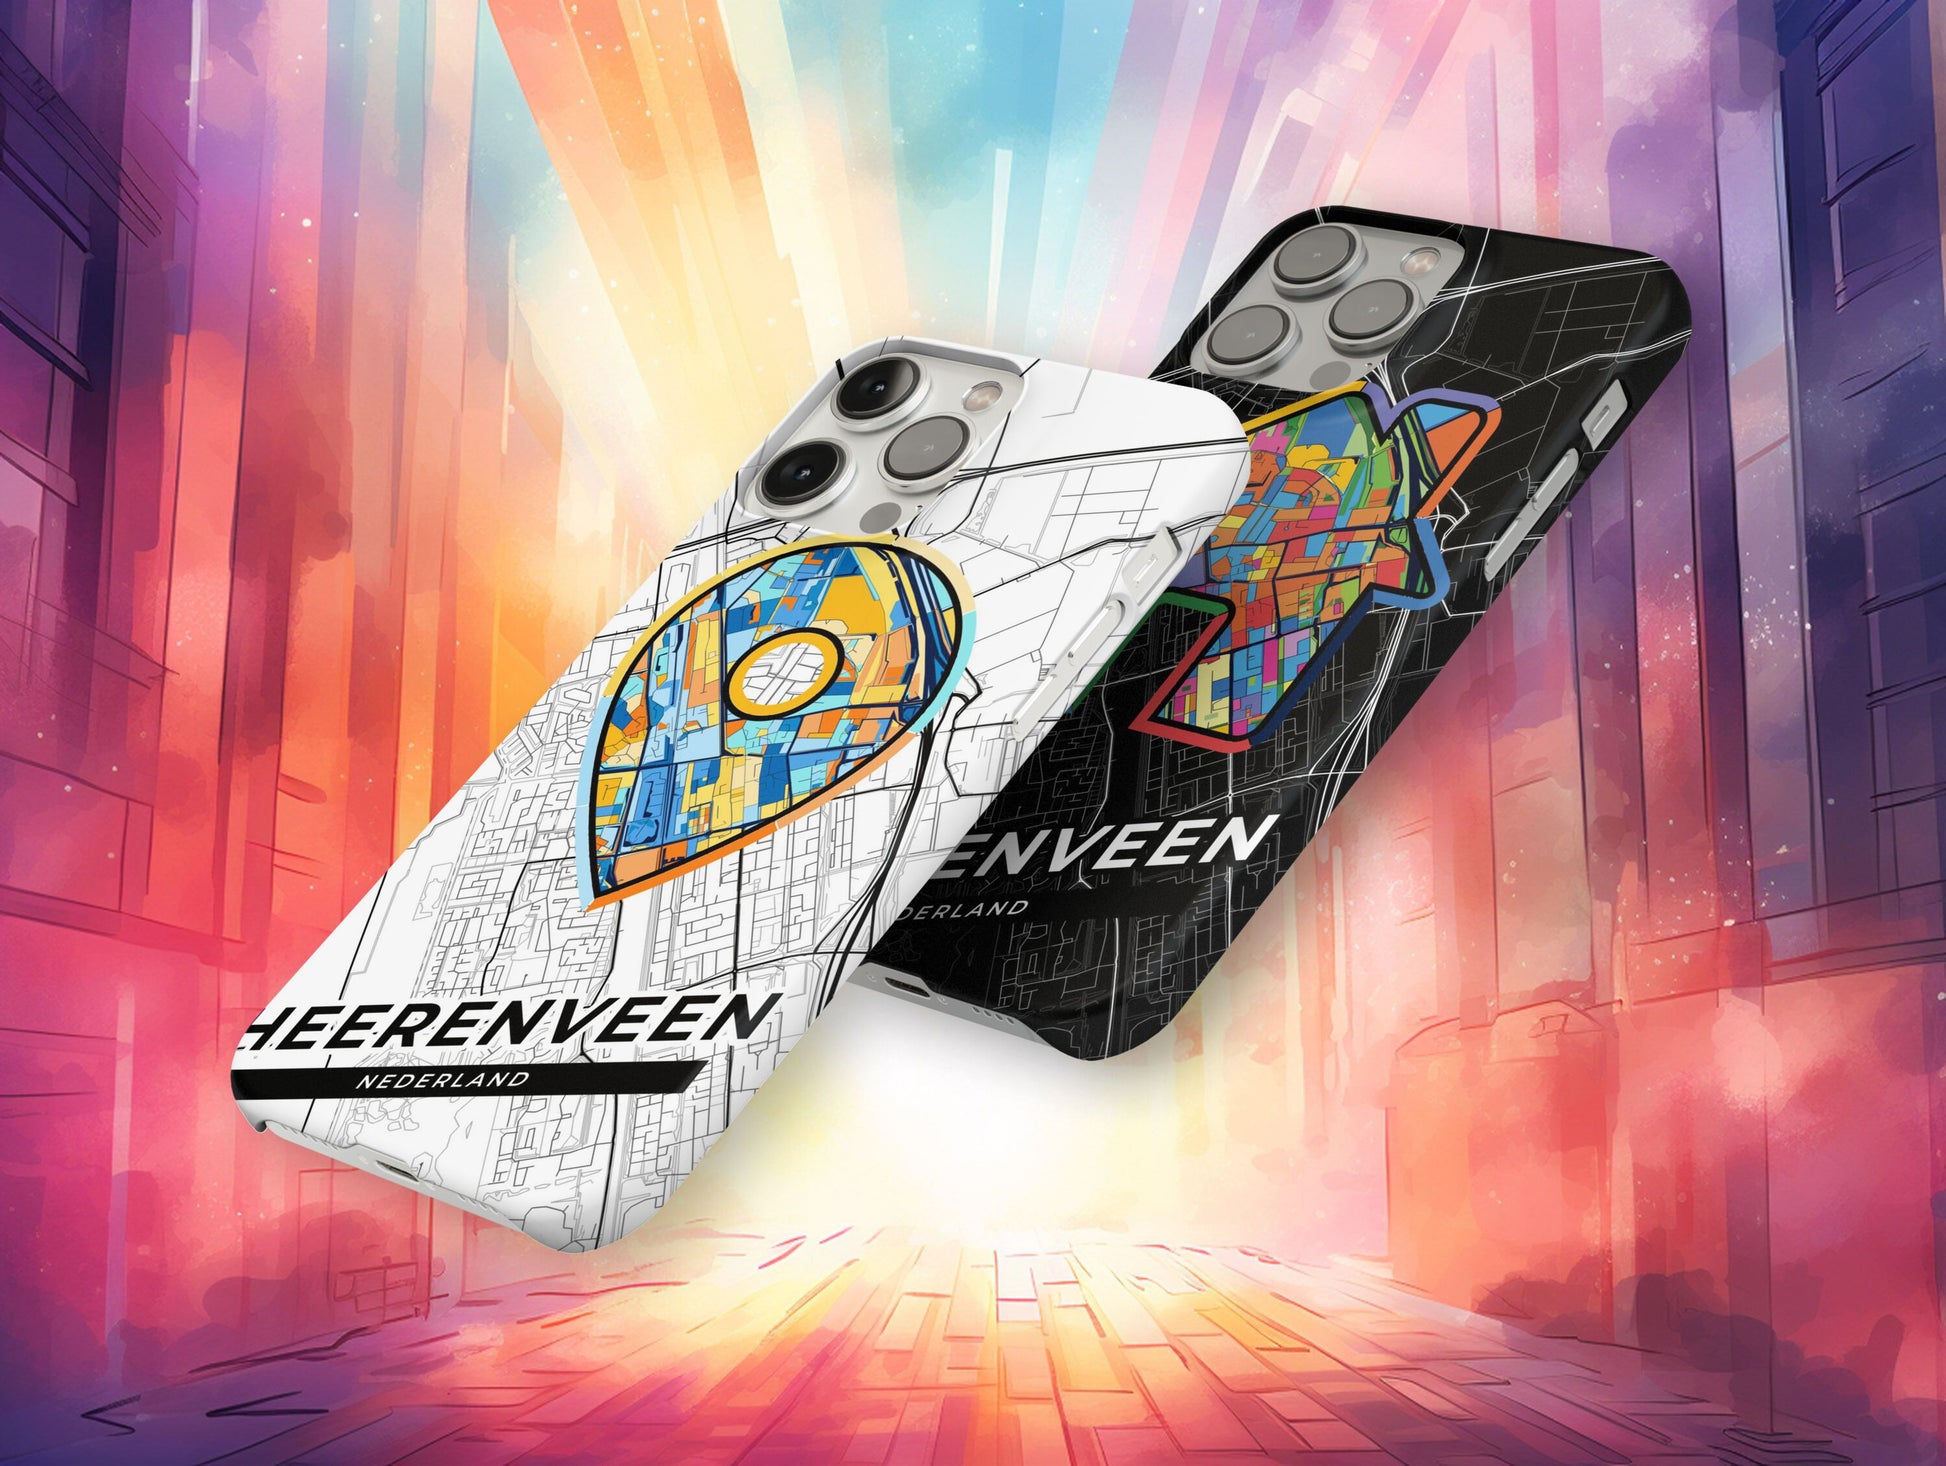 Heerenveen Netherlands slim phone case with colorful icon. Birthday, wedding or housewarming gift. Couple match cases.